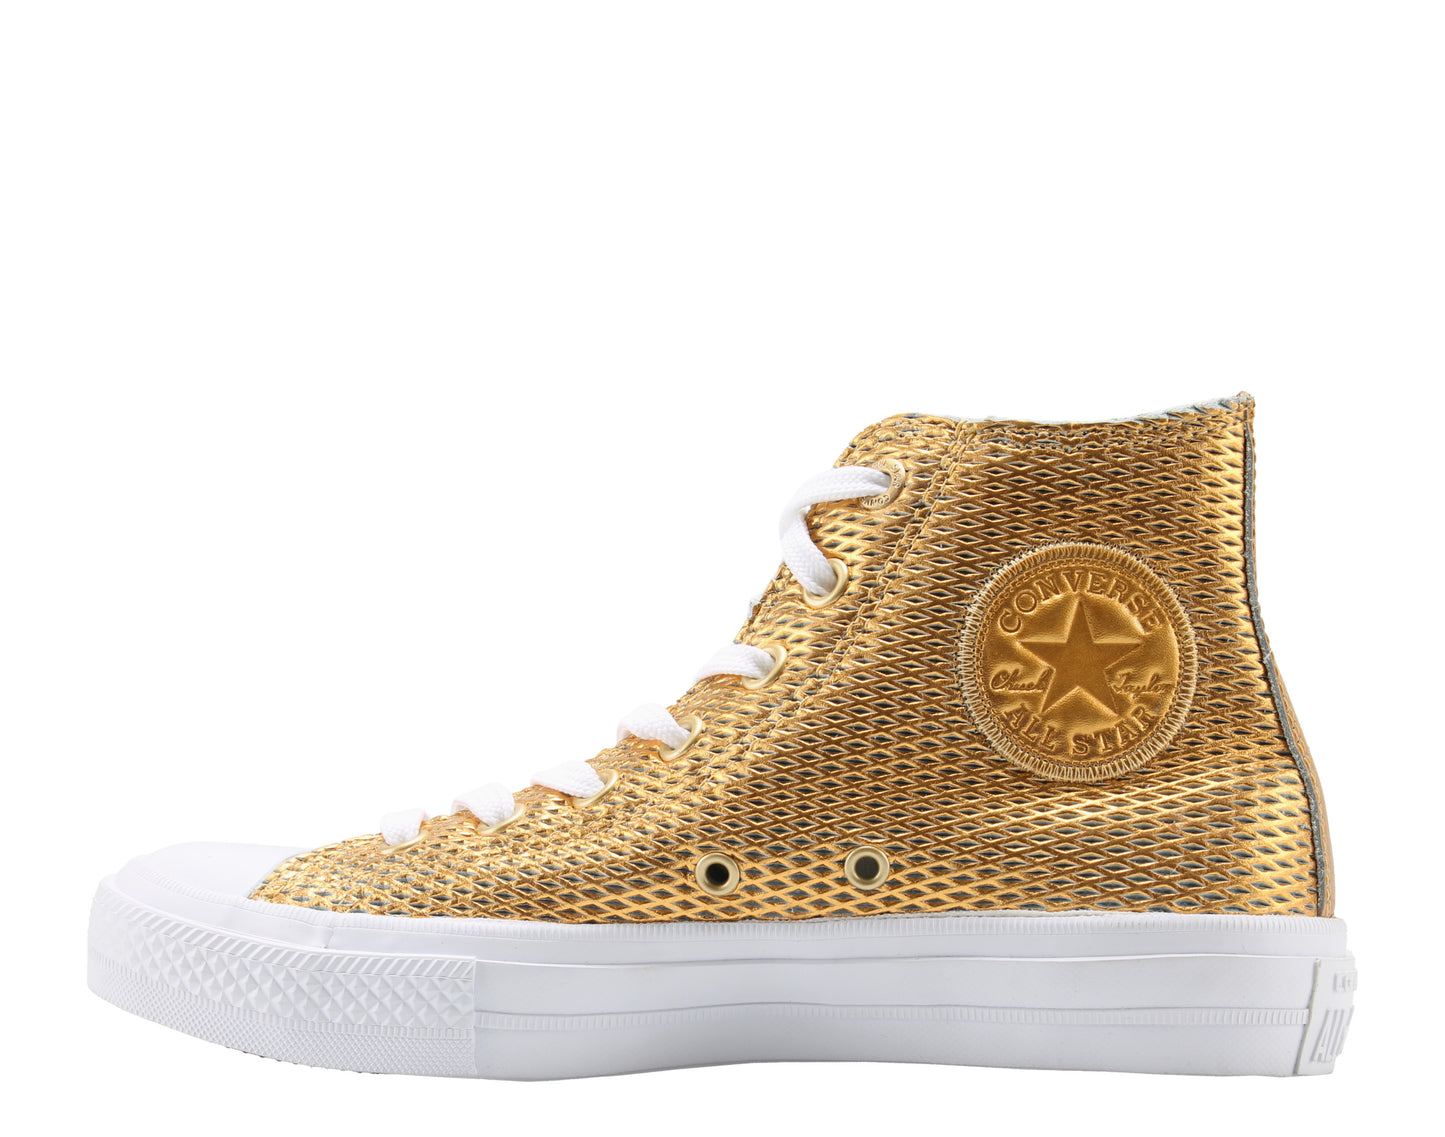 Converse Chuck Taylor All Star II Hi Gold/White Women's Sneakers 555796C